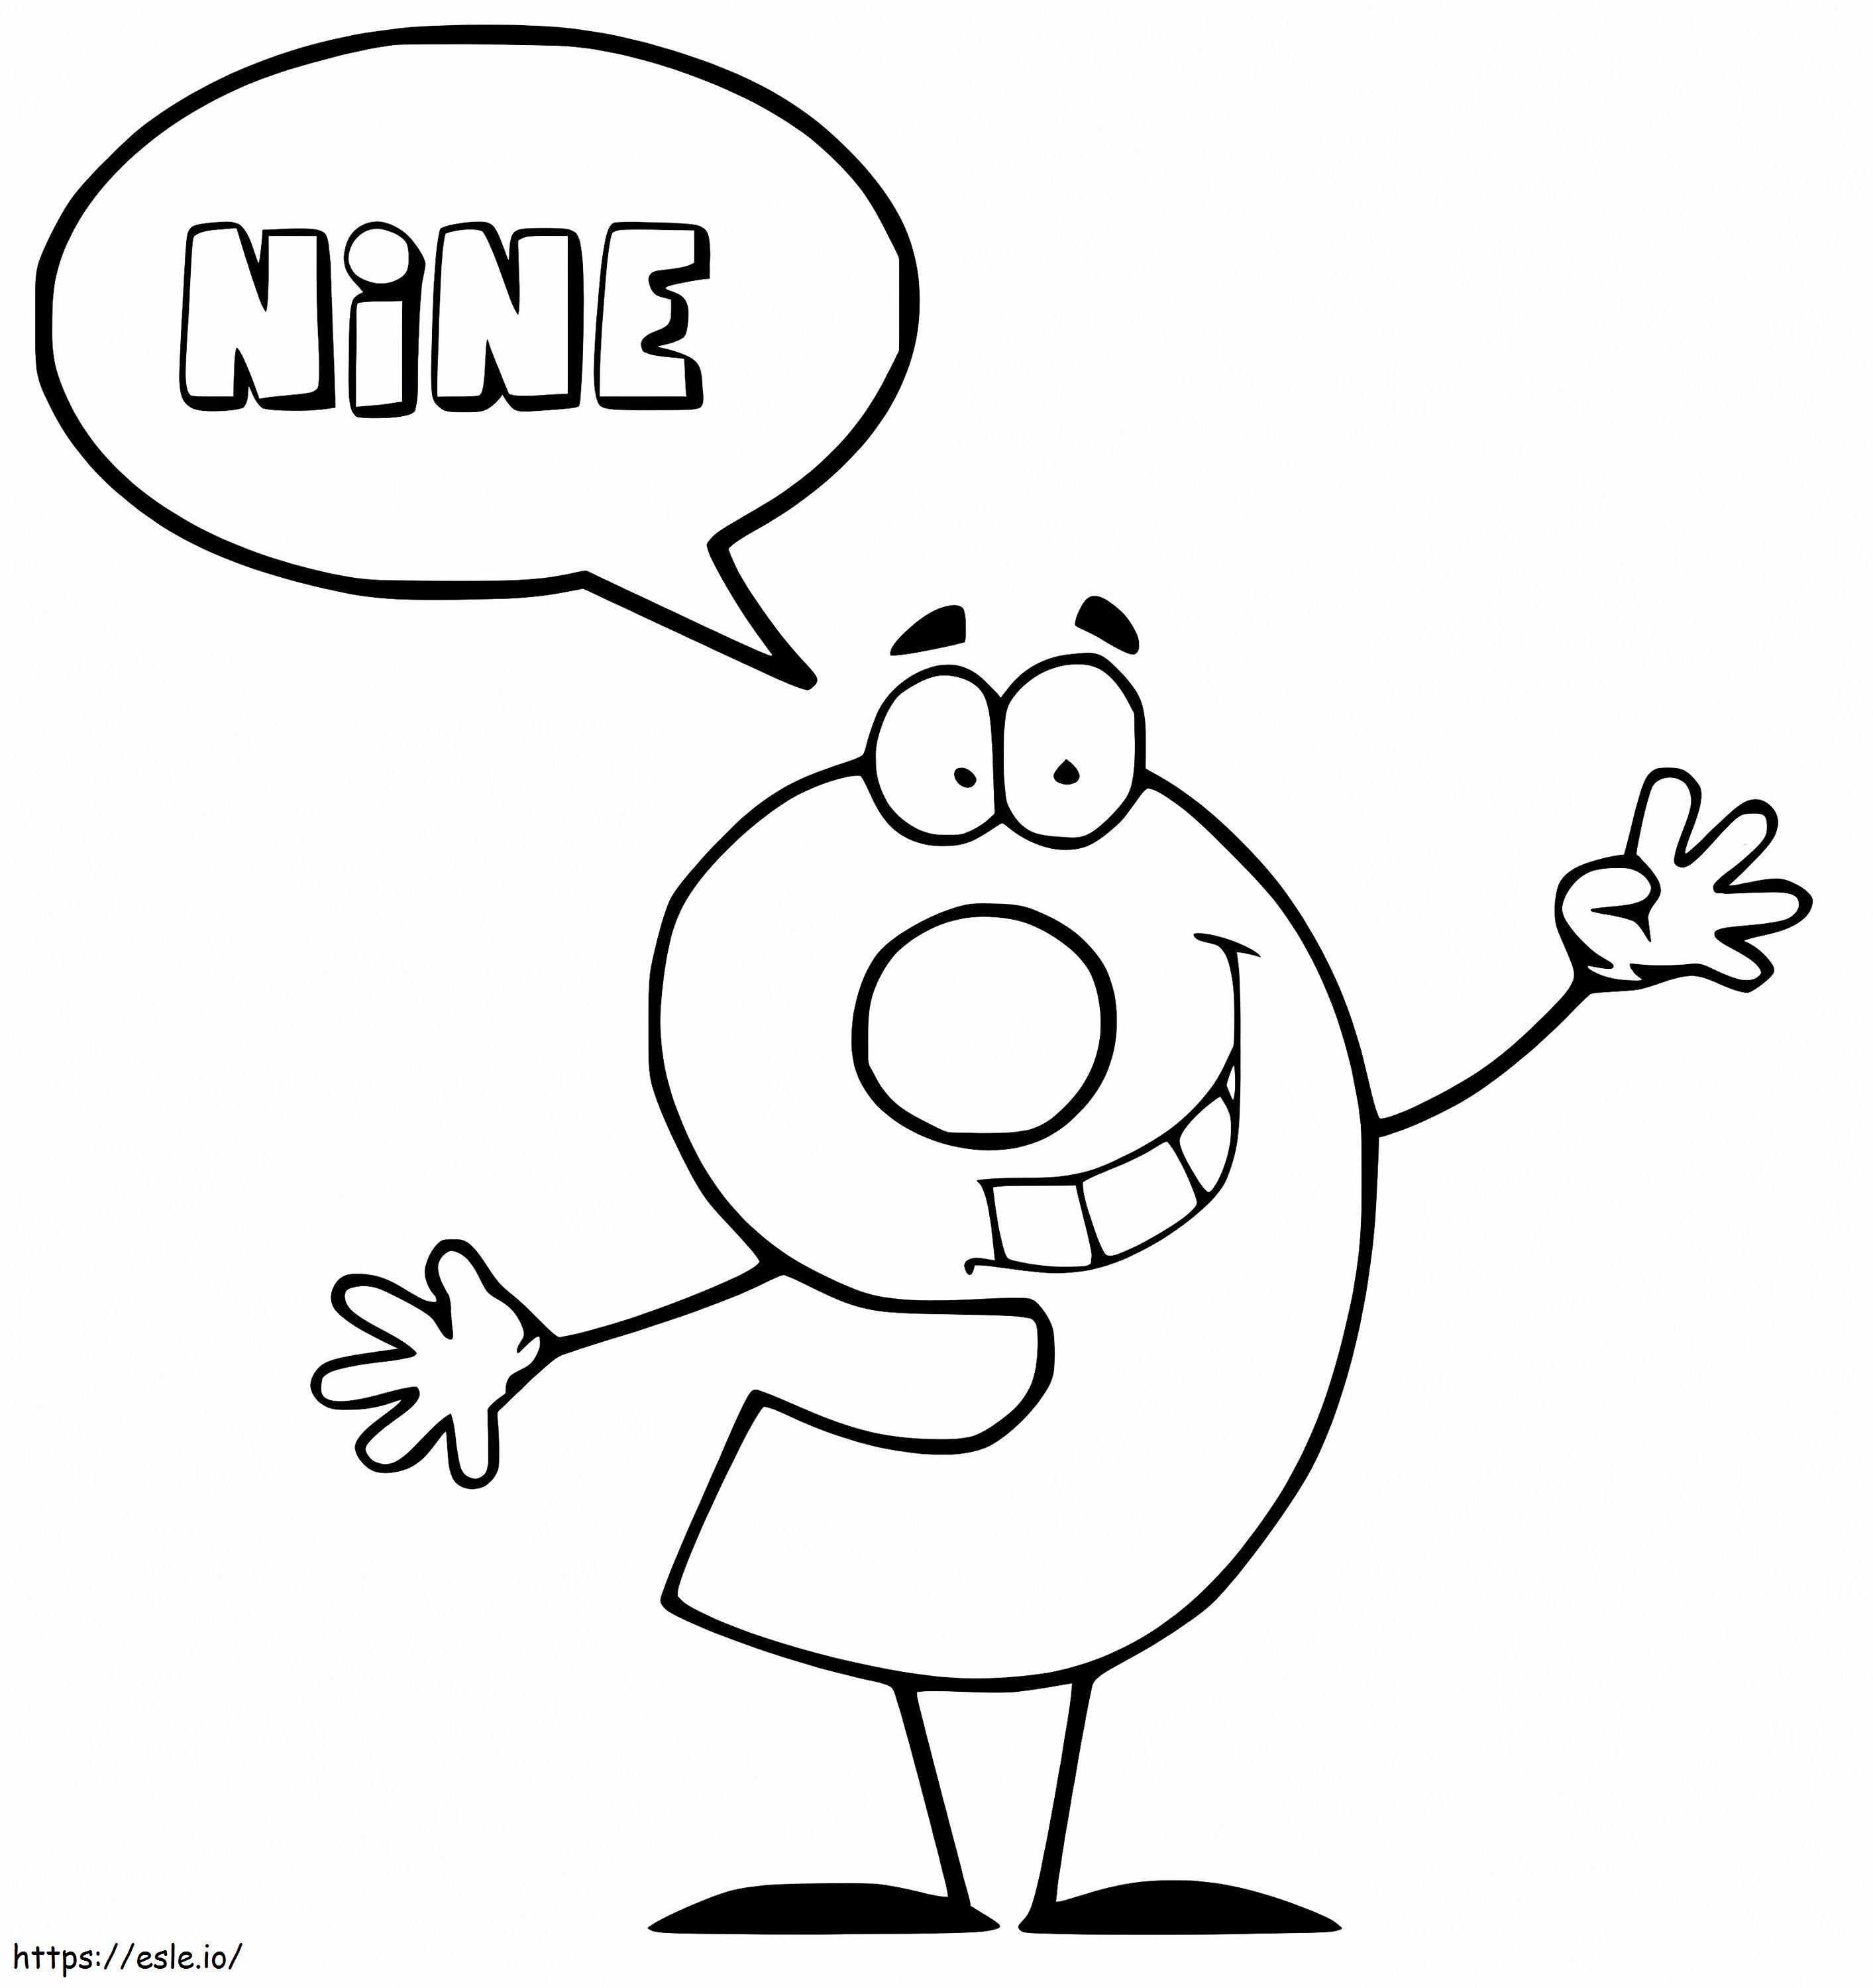 Cartoon Number 9 coloring page